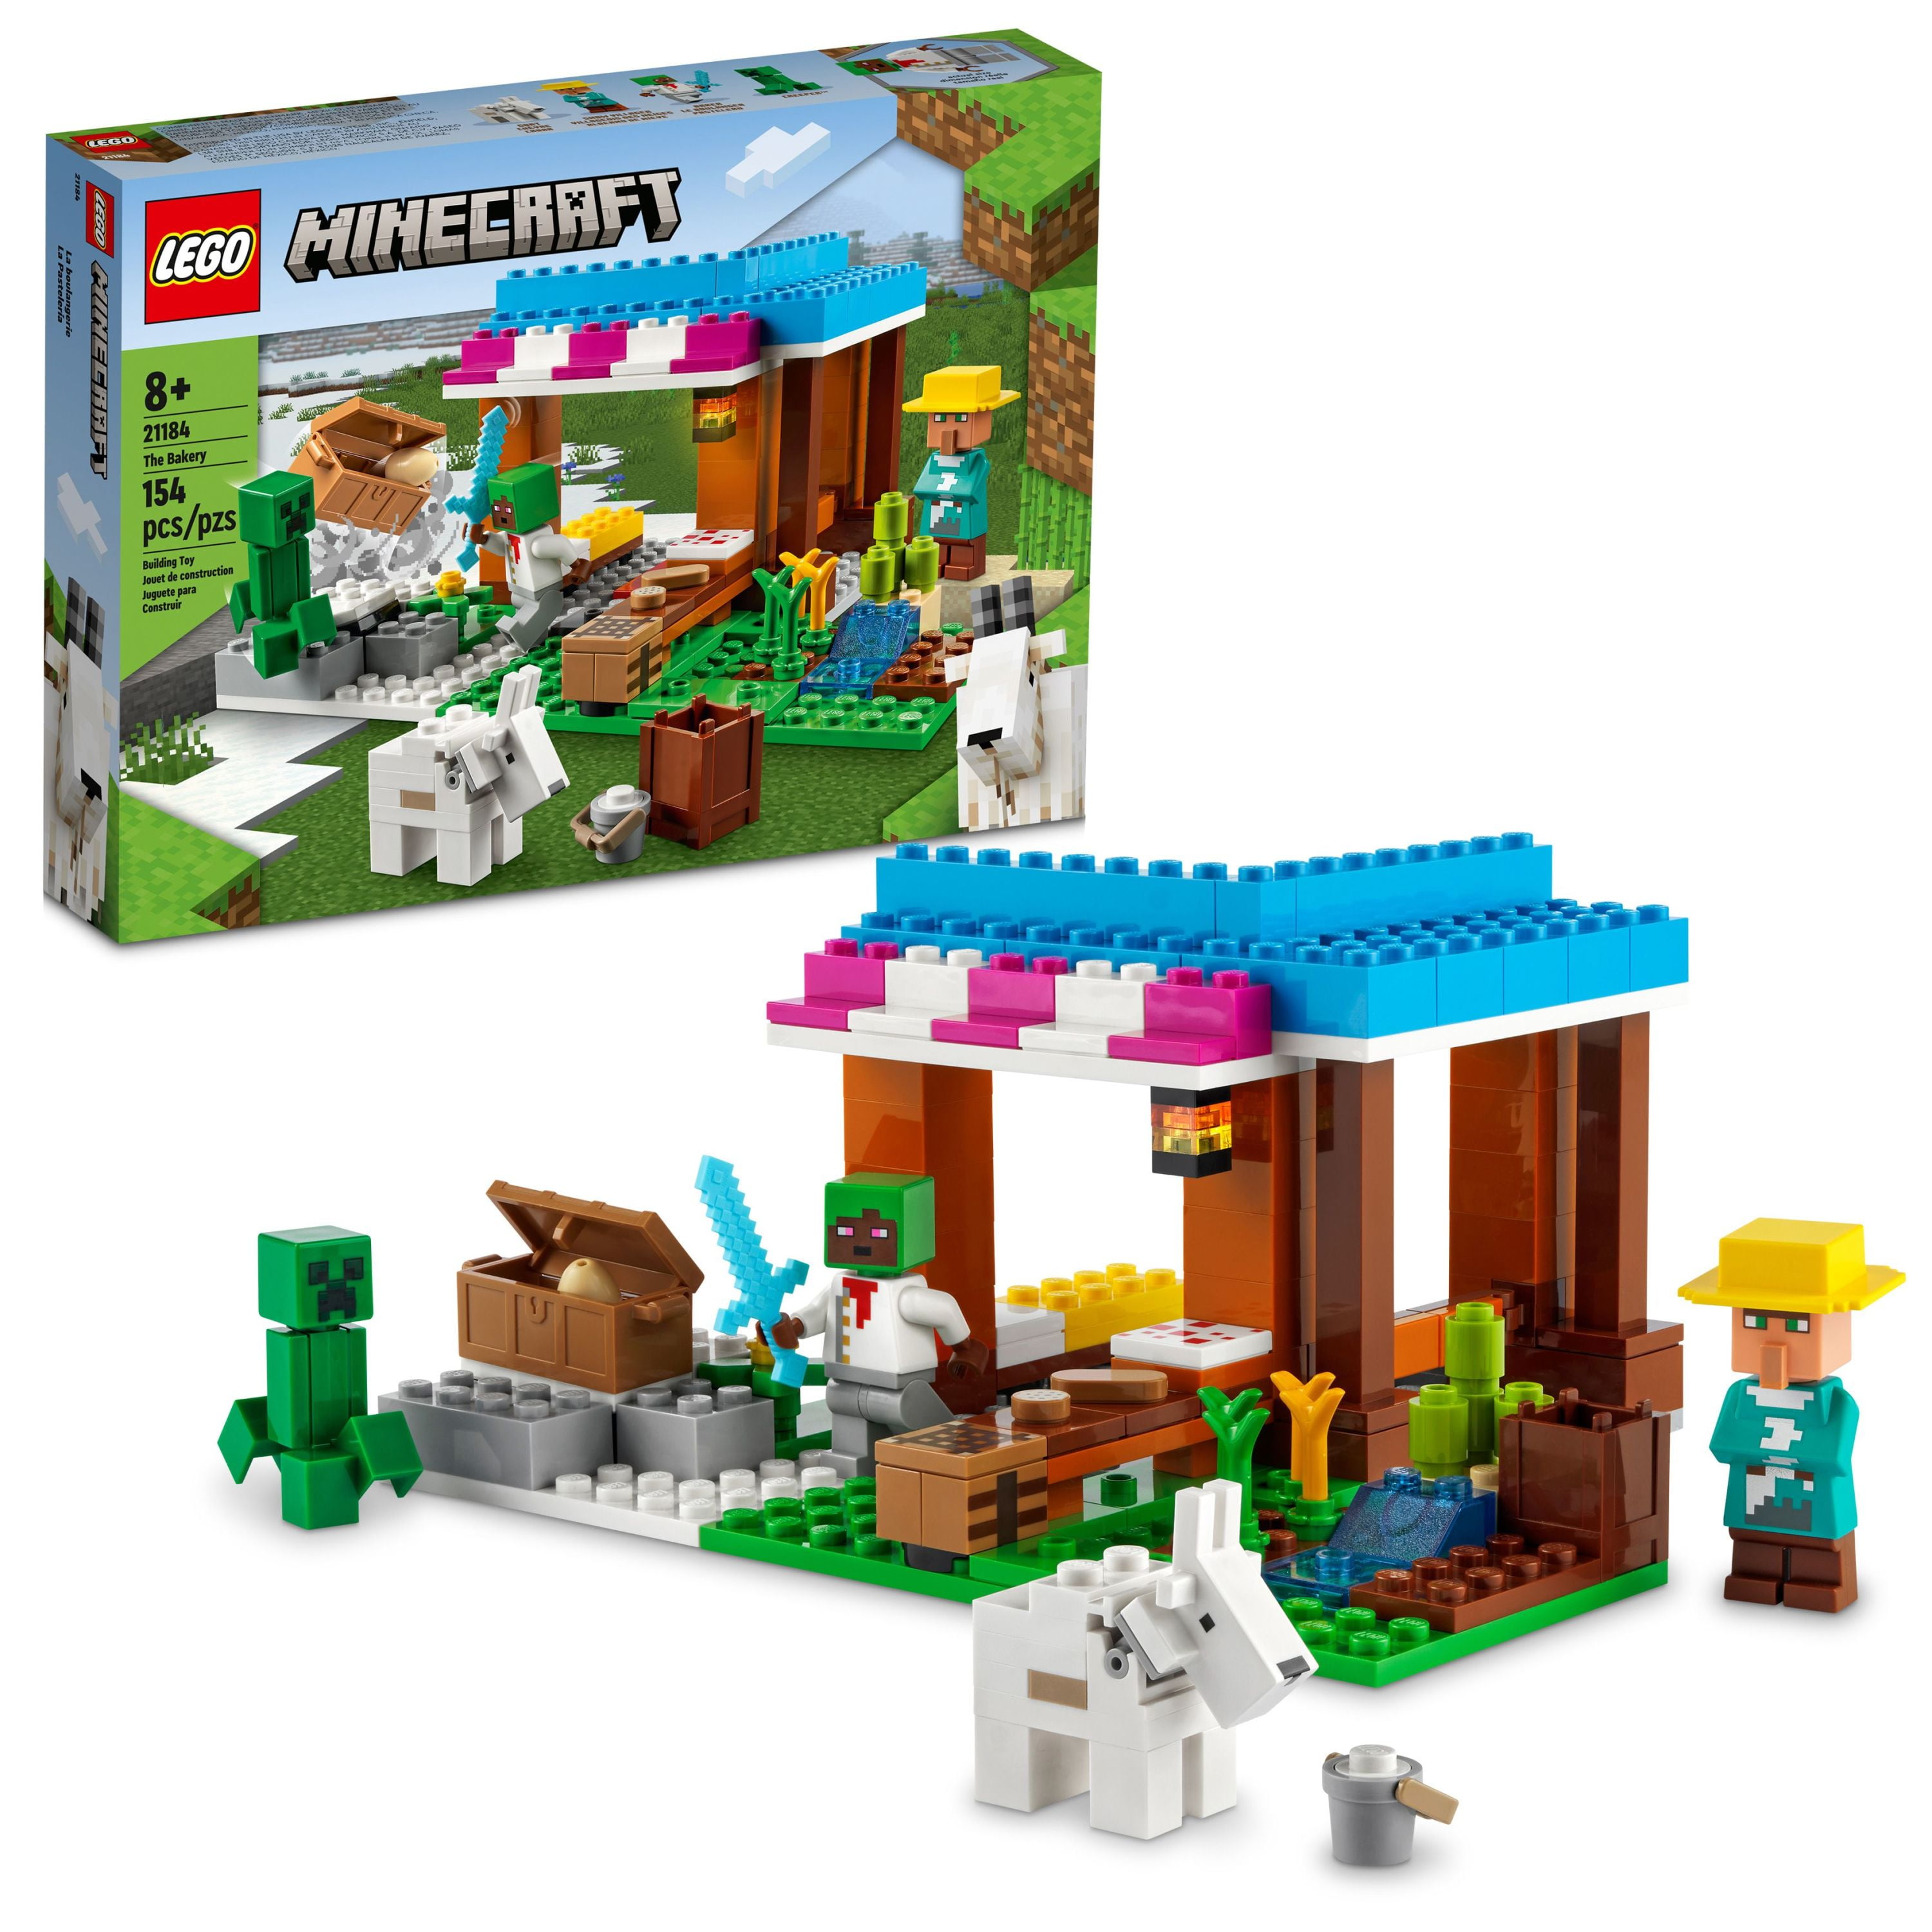 LEGO Minecraft The Bakery 21184 - Building Toy Set for Kids, Featuring 3  Figures and a Goat, Game Inspired Play with Village and Treasure Chest  Accessories, Great Gift for Girls and Boys